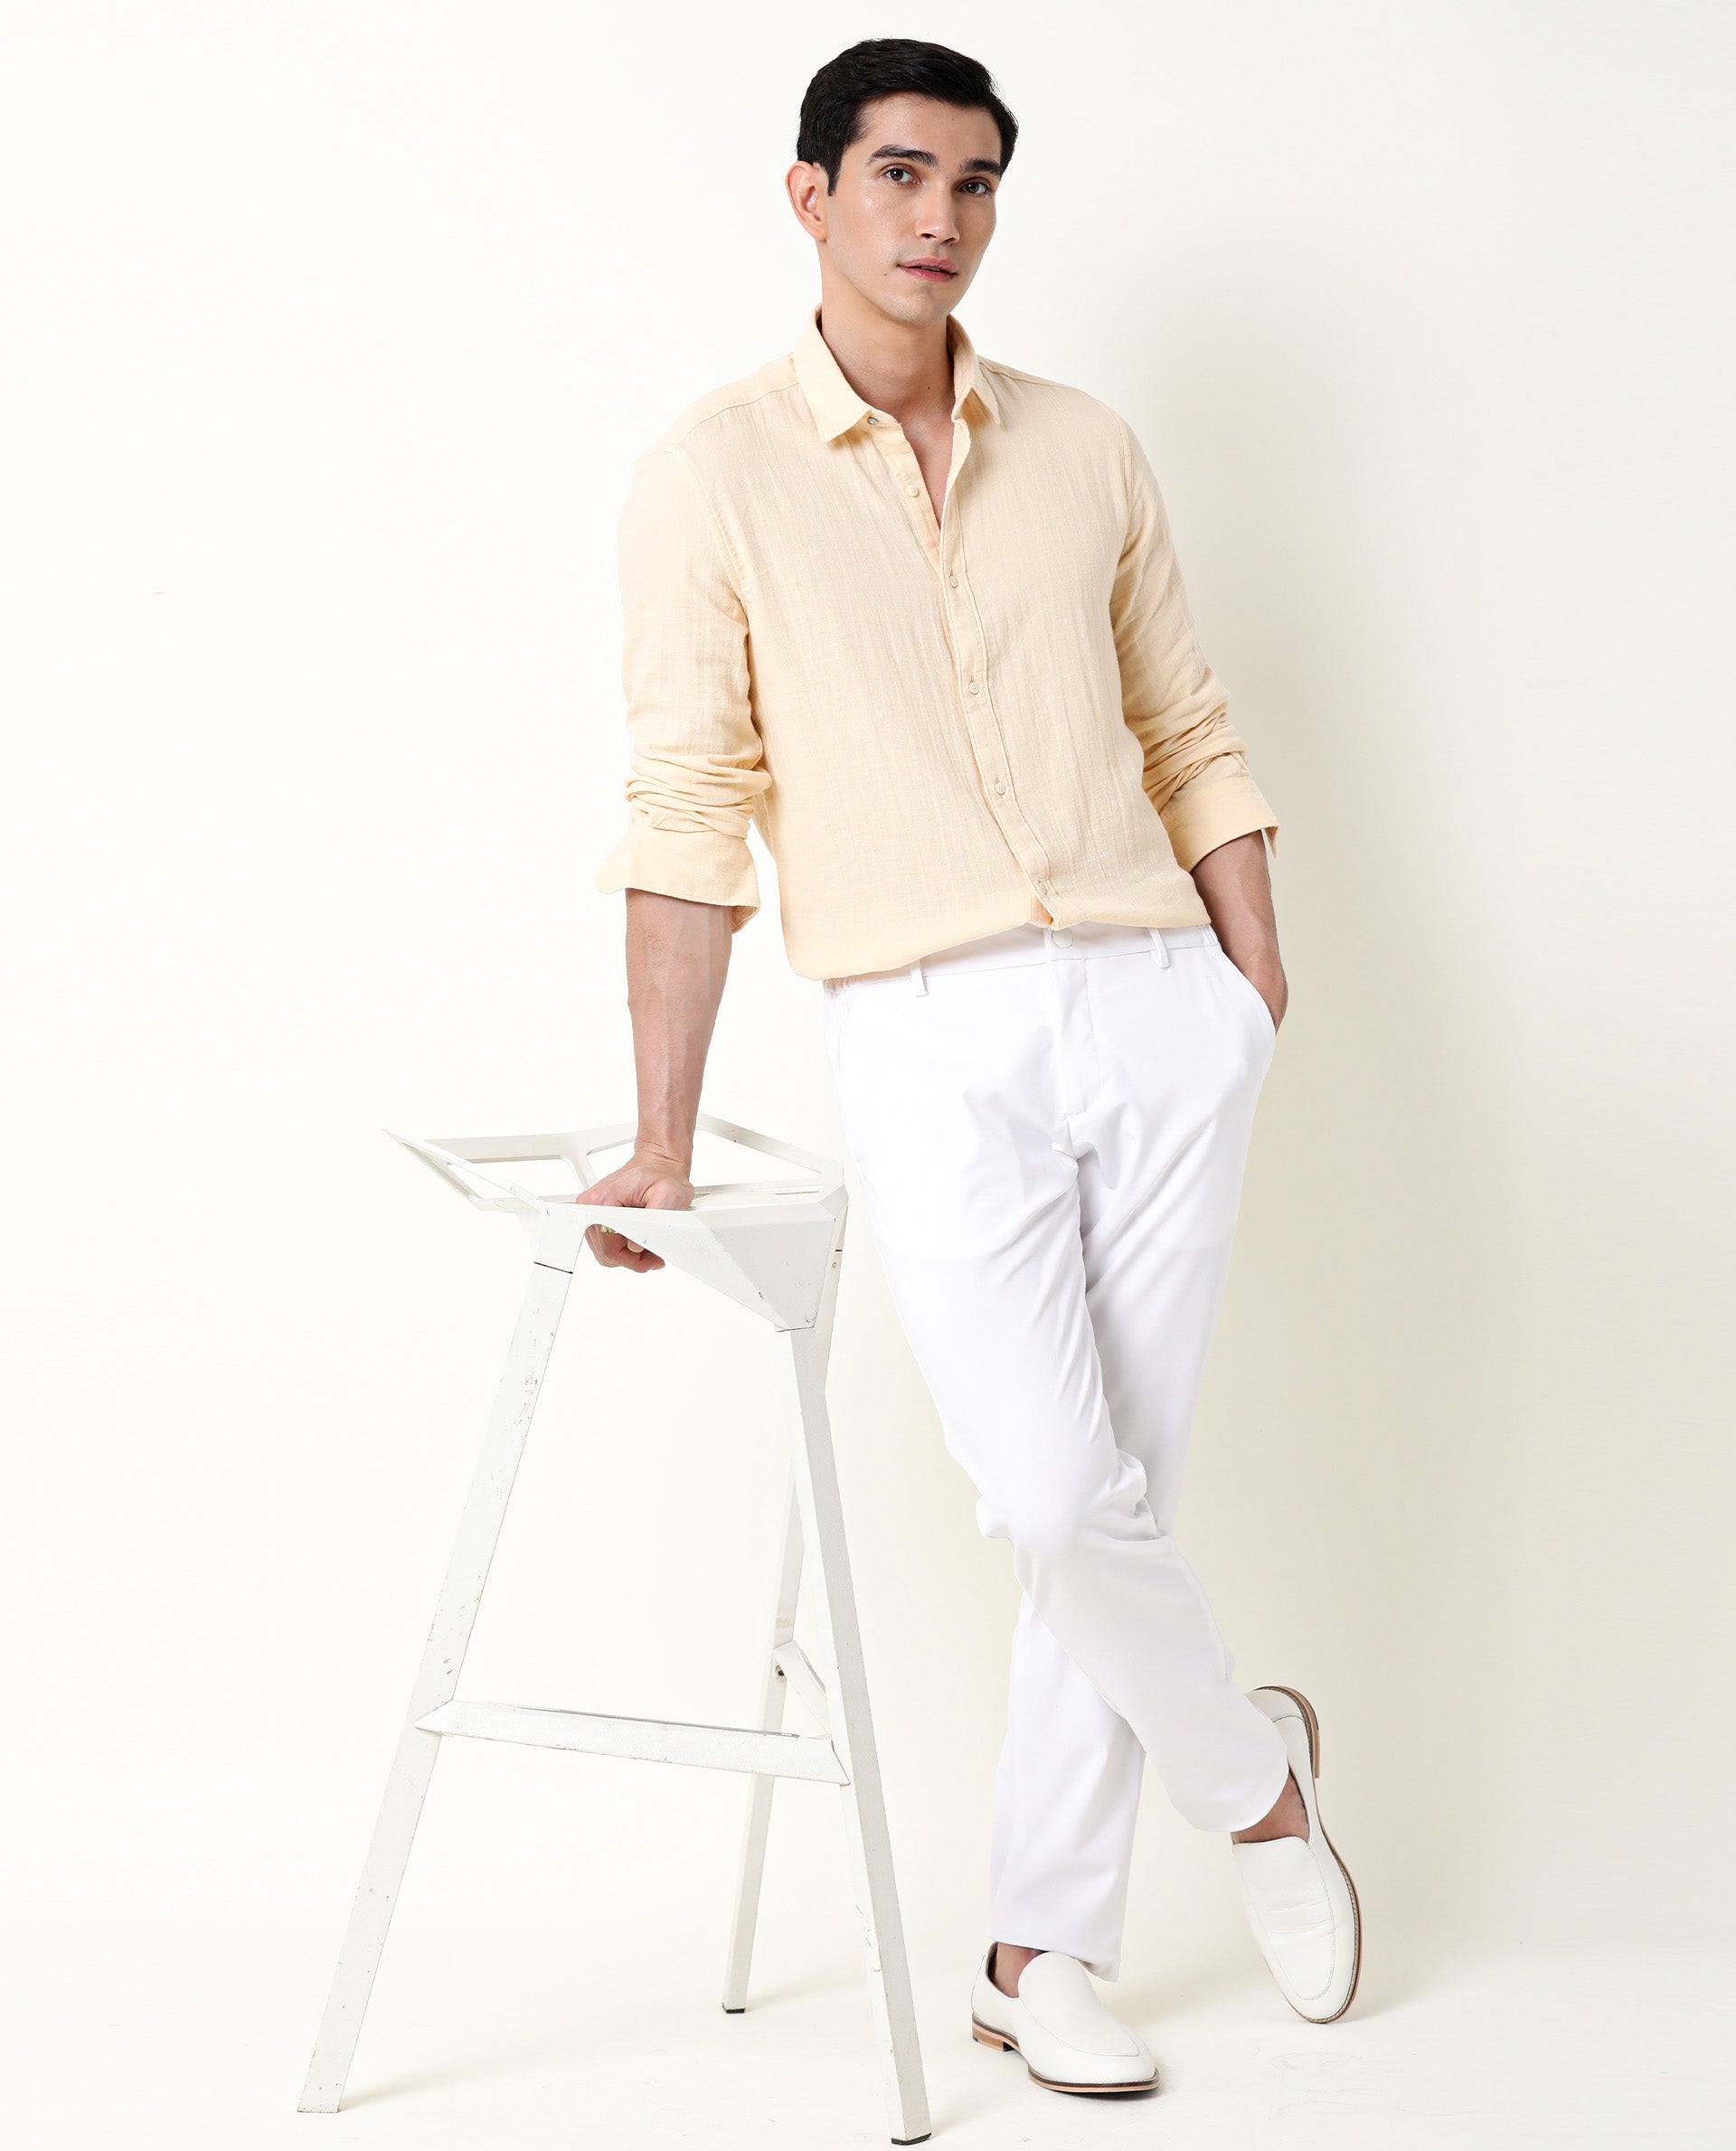 A Young Attractive Fellow In A White Shirt And Beige Pants Looks In The  Distance On A Light Blurred Background Stock Photo Picture and Royalty  Free Image Image 83948926